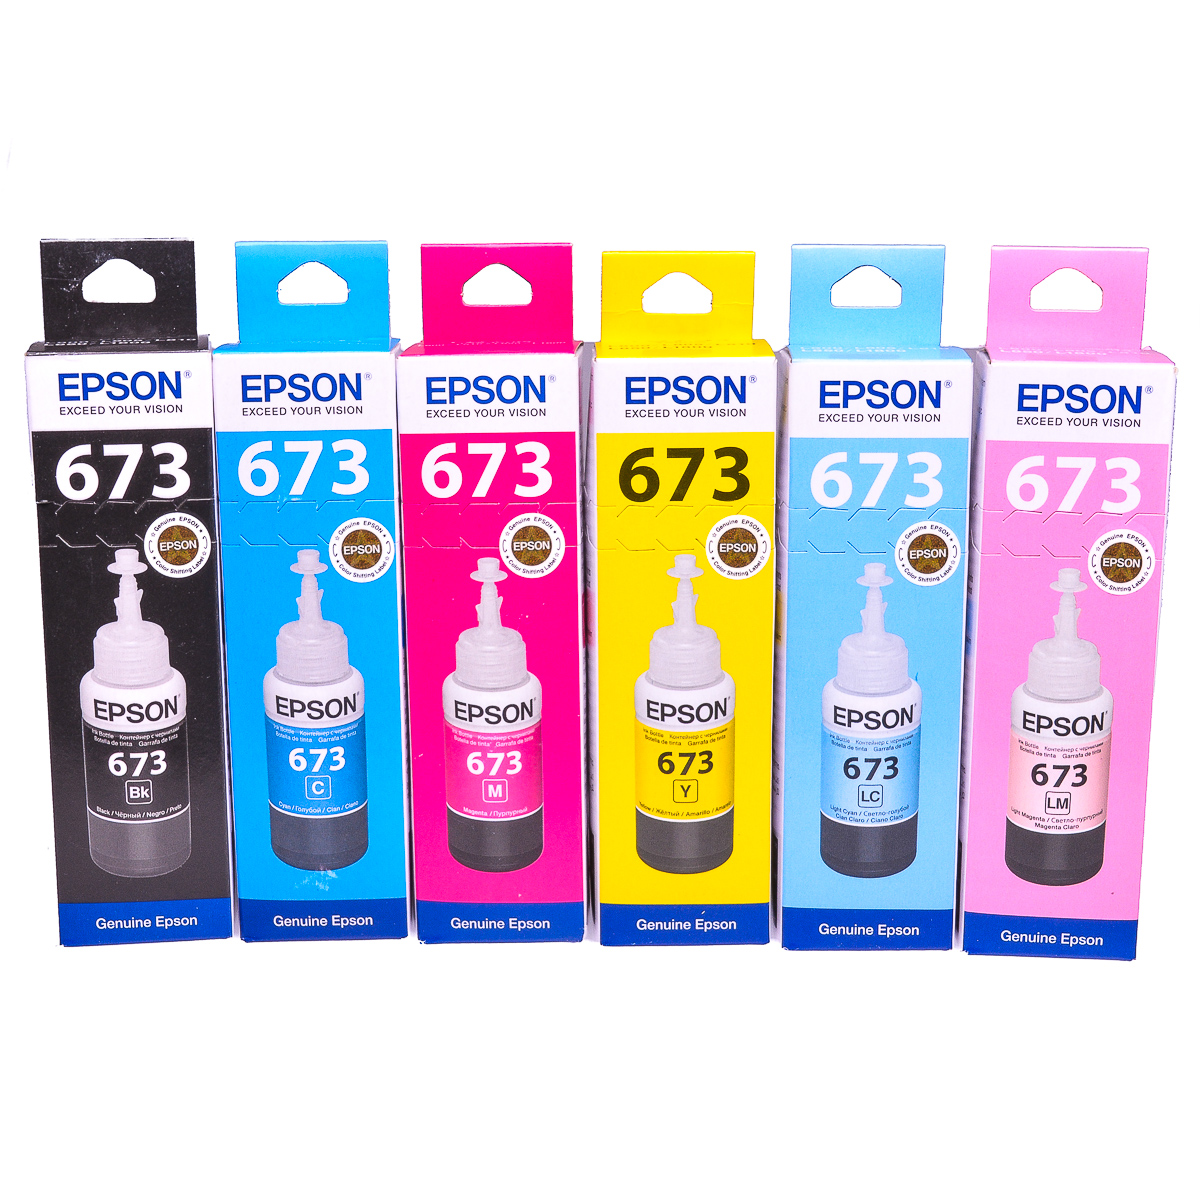 Genuine Multipack ink refill for use with Epson Stylus 1500W printer